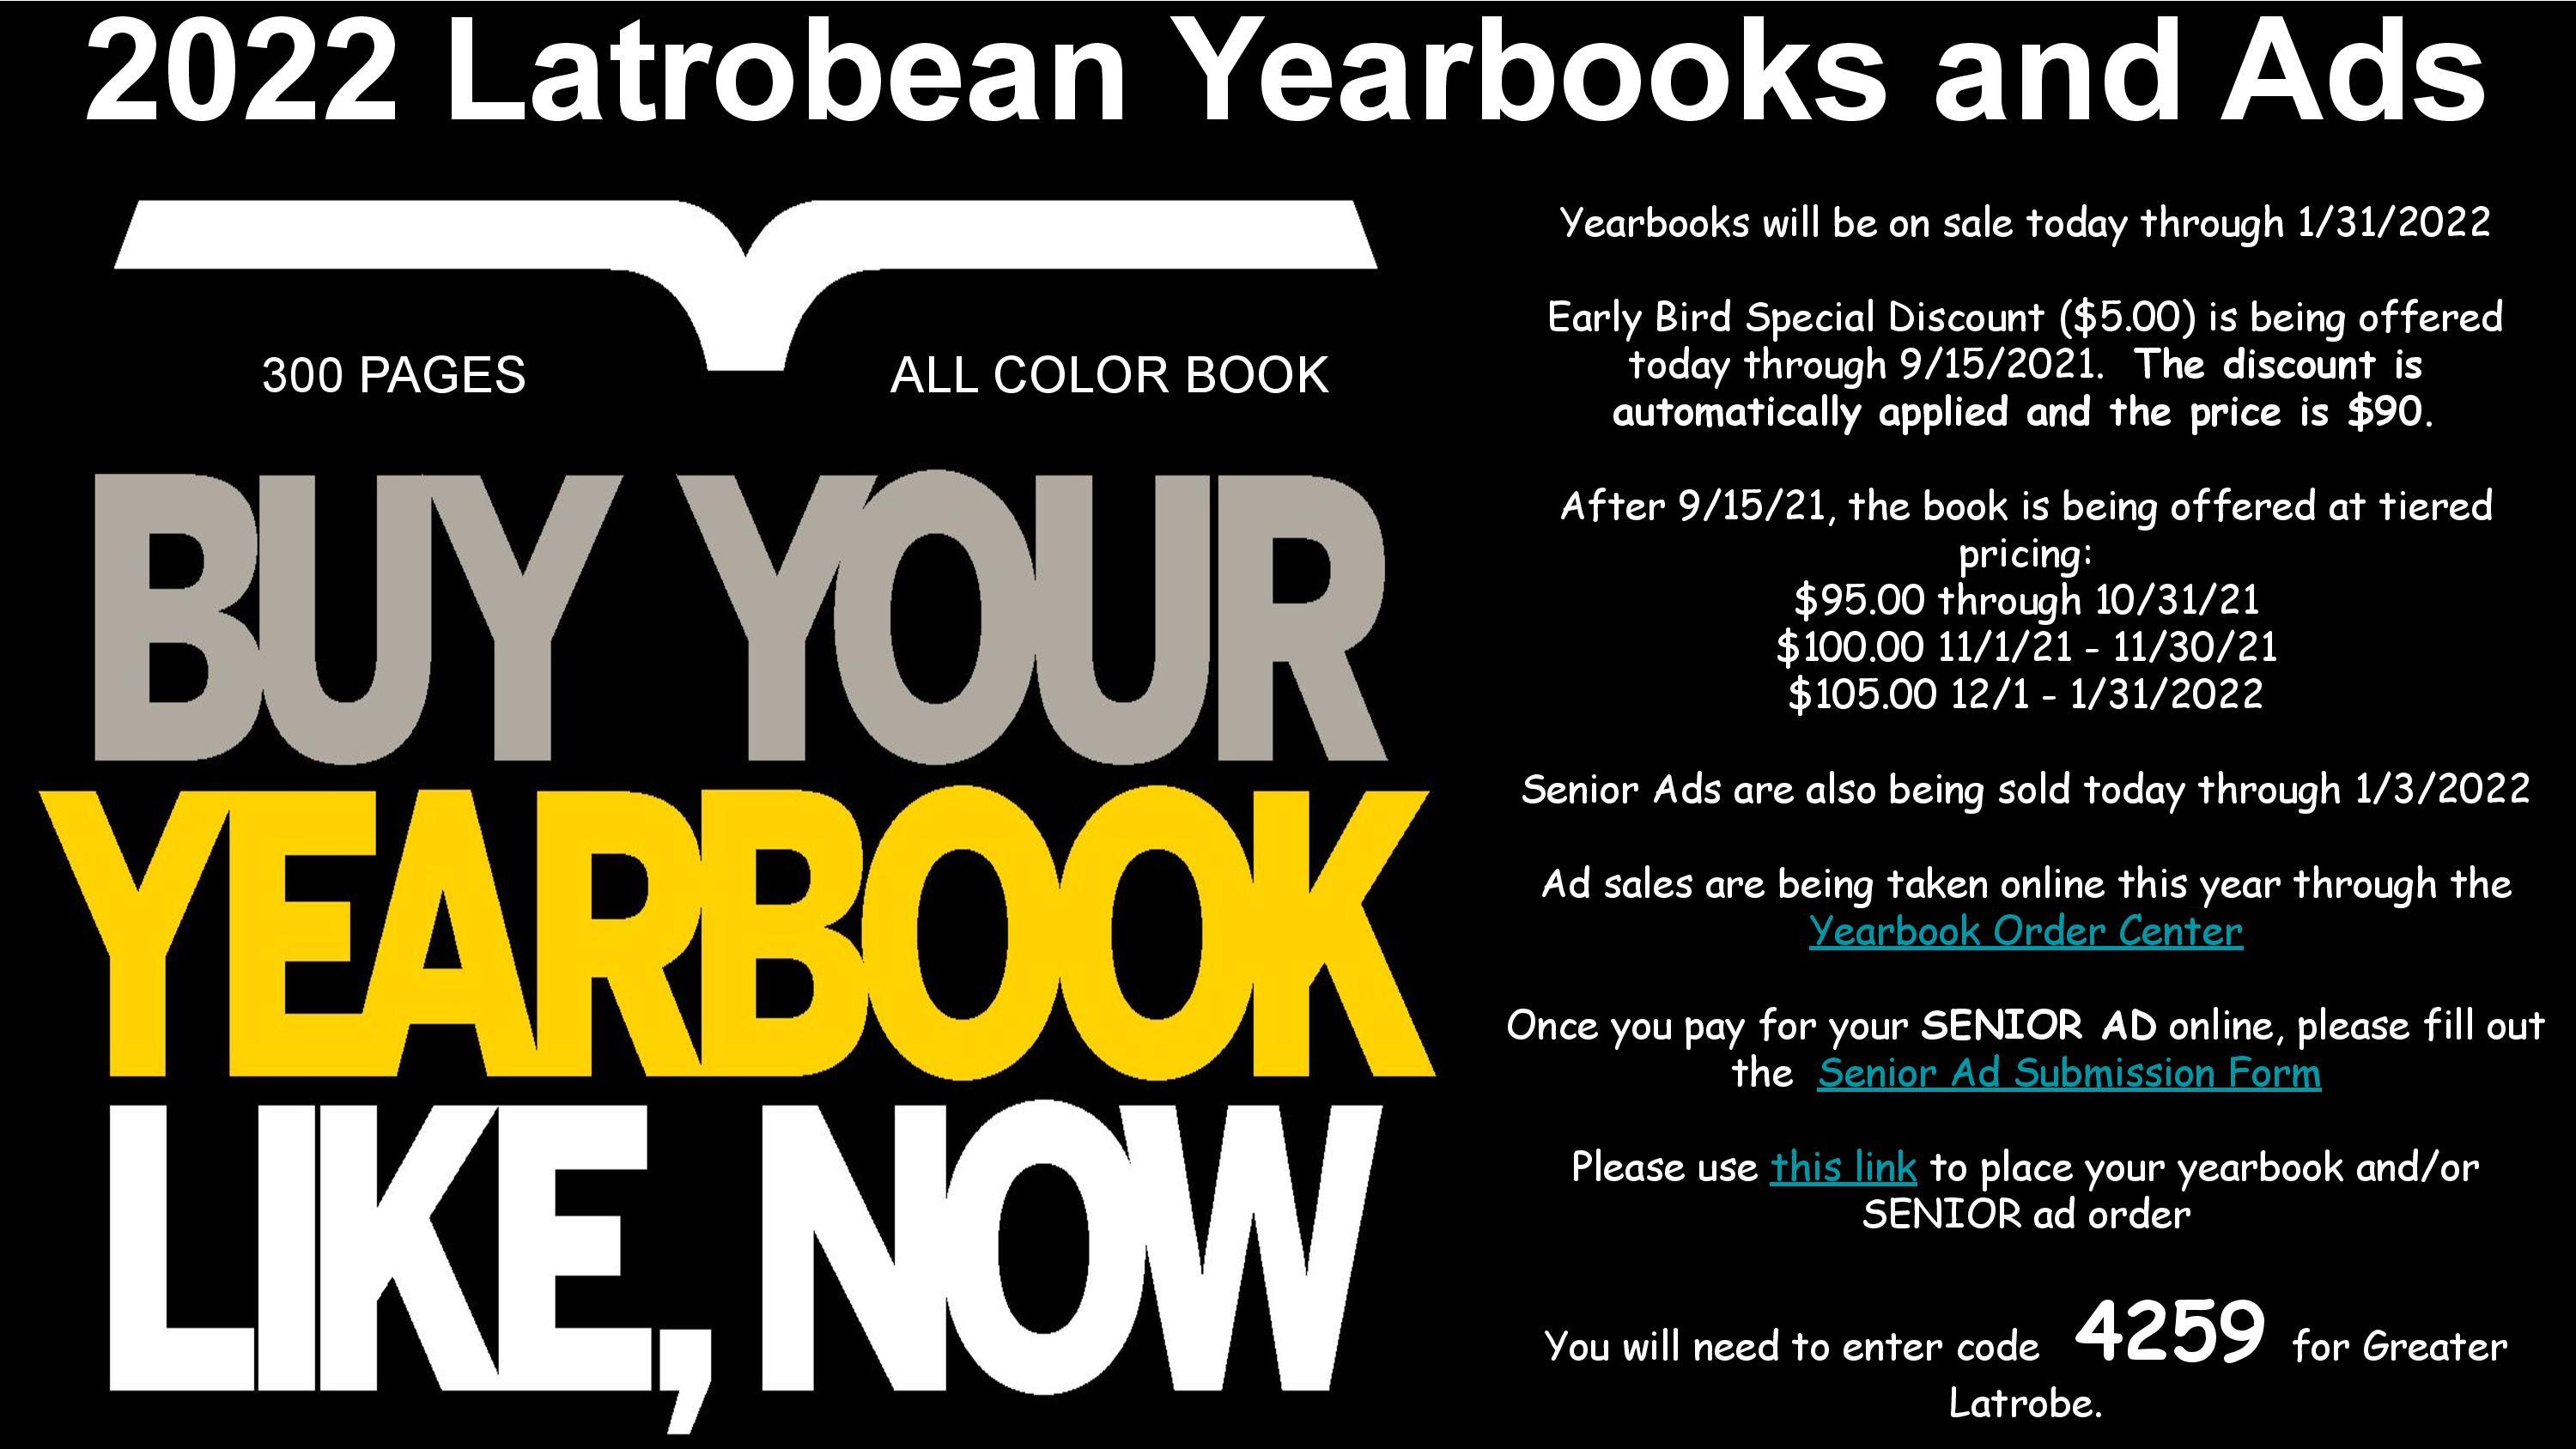 Yearbook Sales and Ads